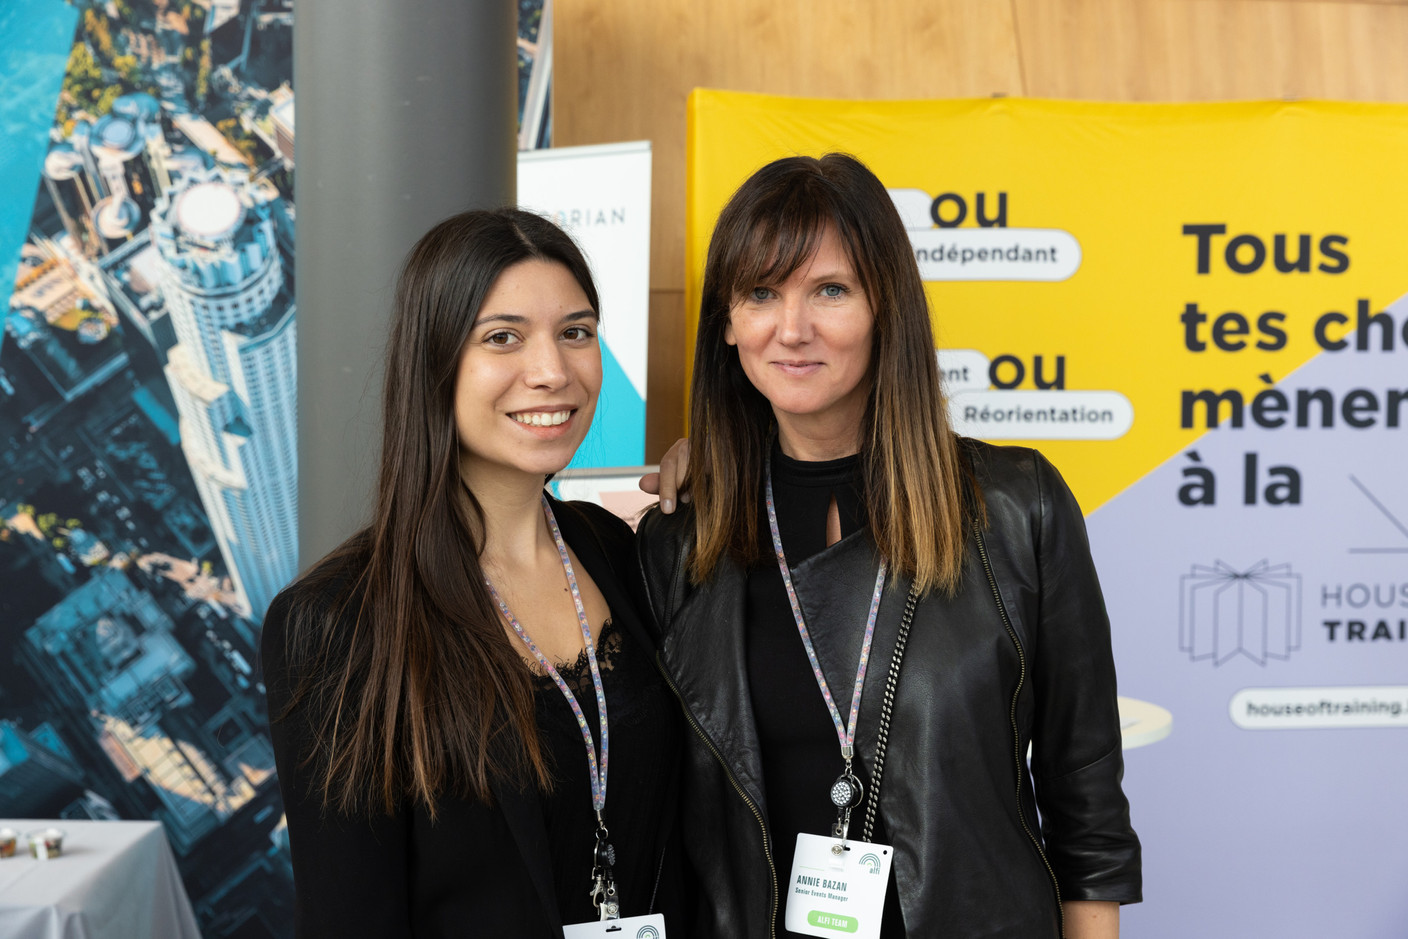 Eleni Vasileiadou and Annie Bazan of the Association of the Luxembourg Fund Industry. Photo: Romain Gamba